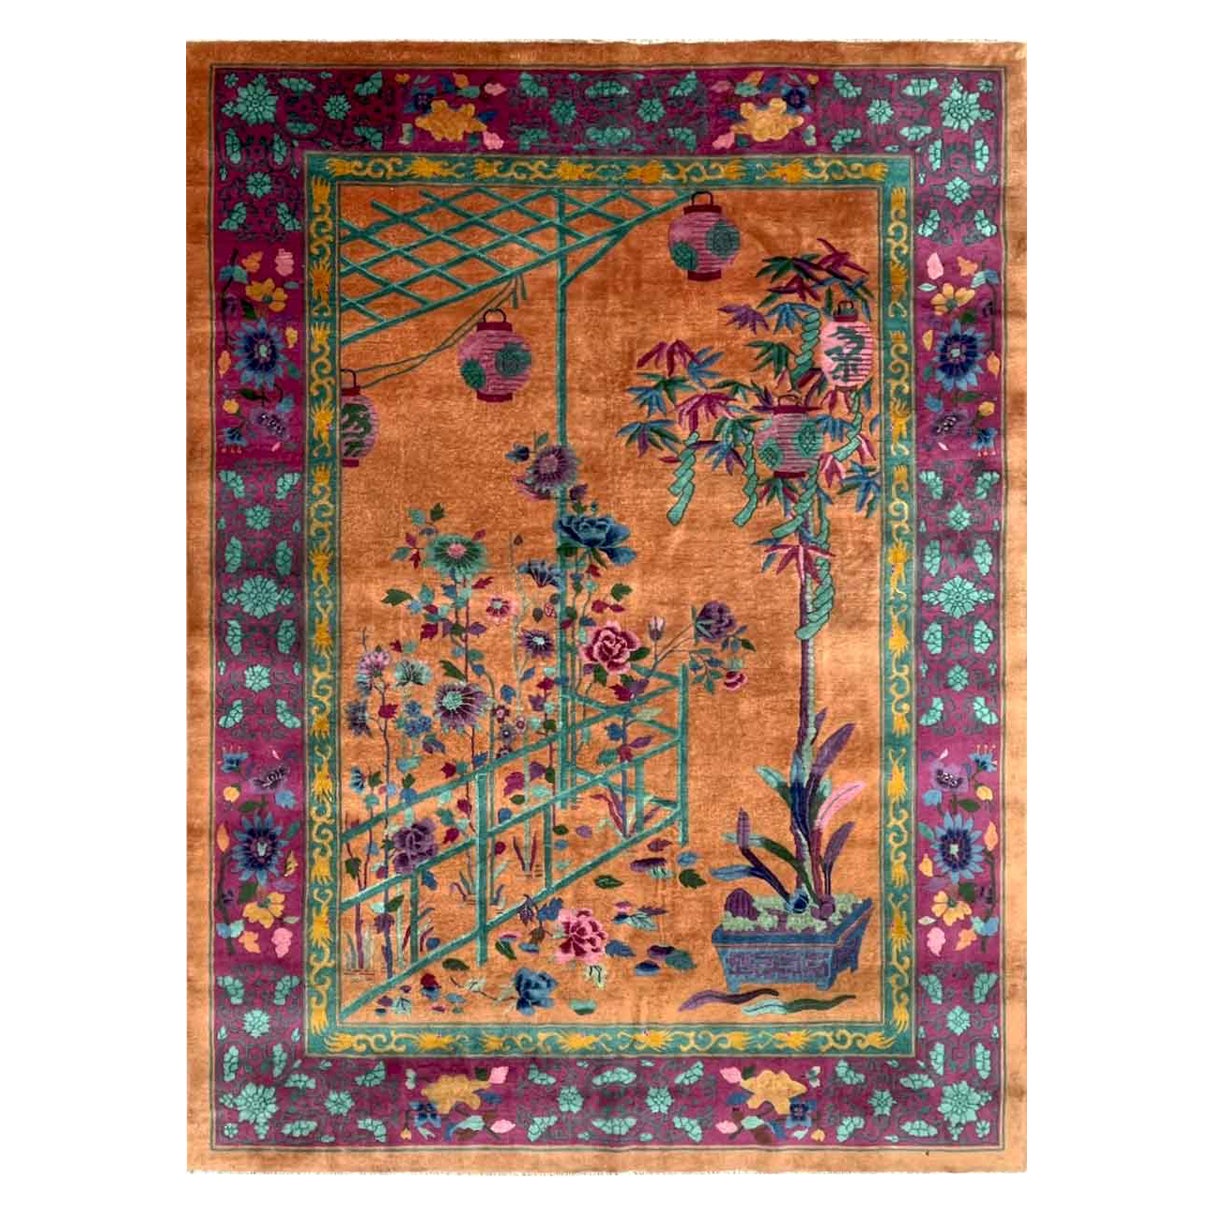 Antique Art Deco Chinese Oriental Rug, wonderful Gold 8'9" x 11'8" #17432 For Sale